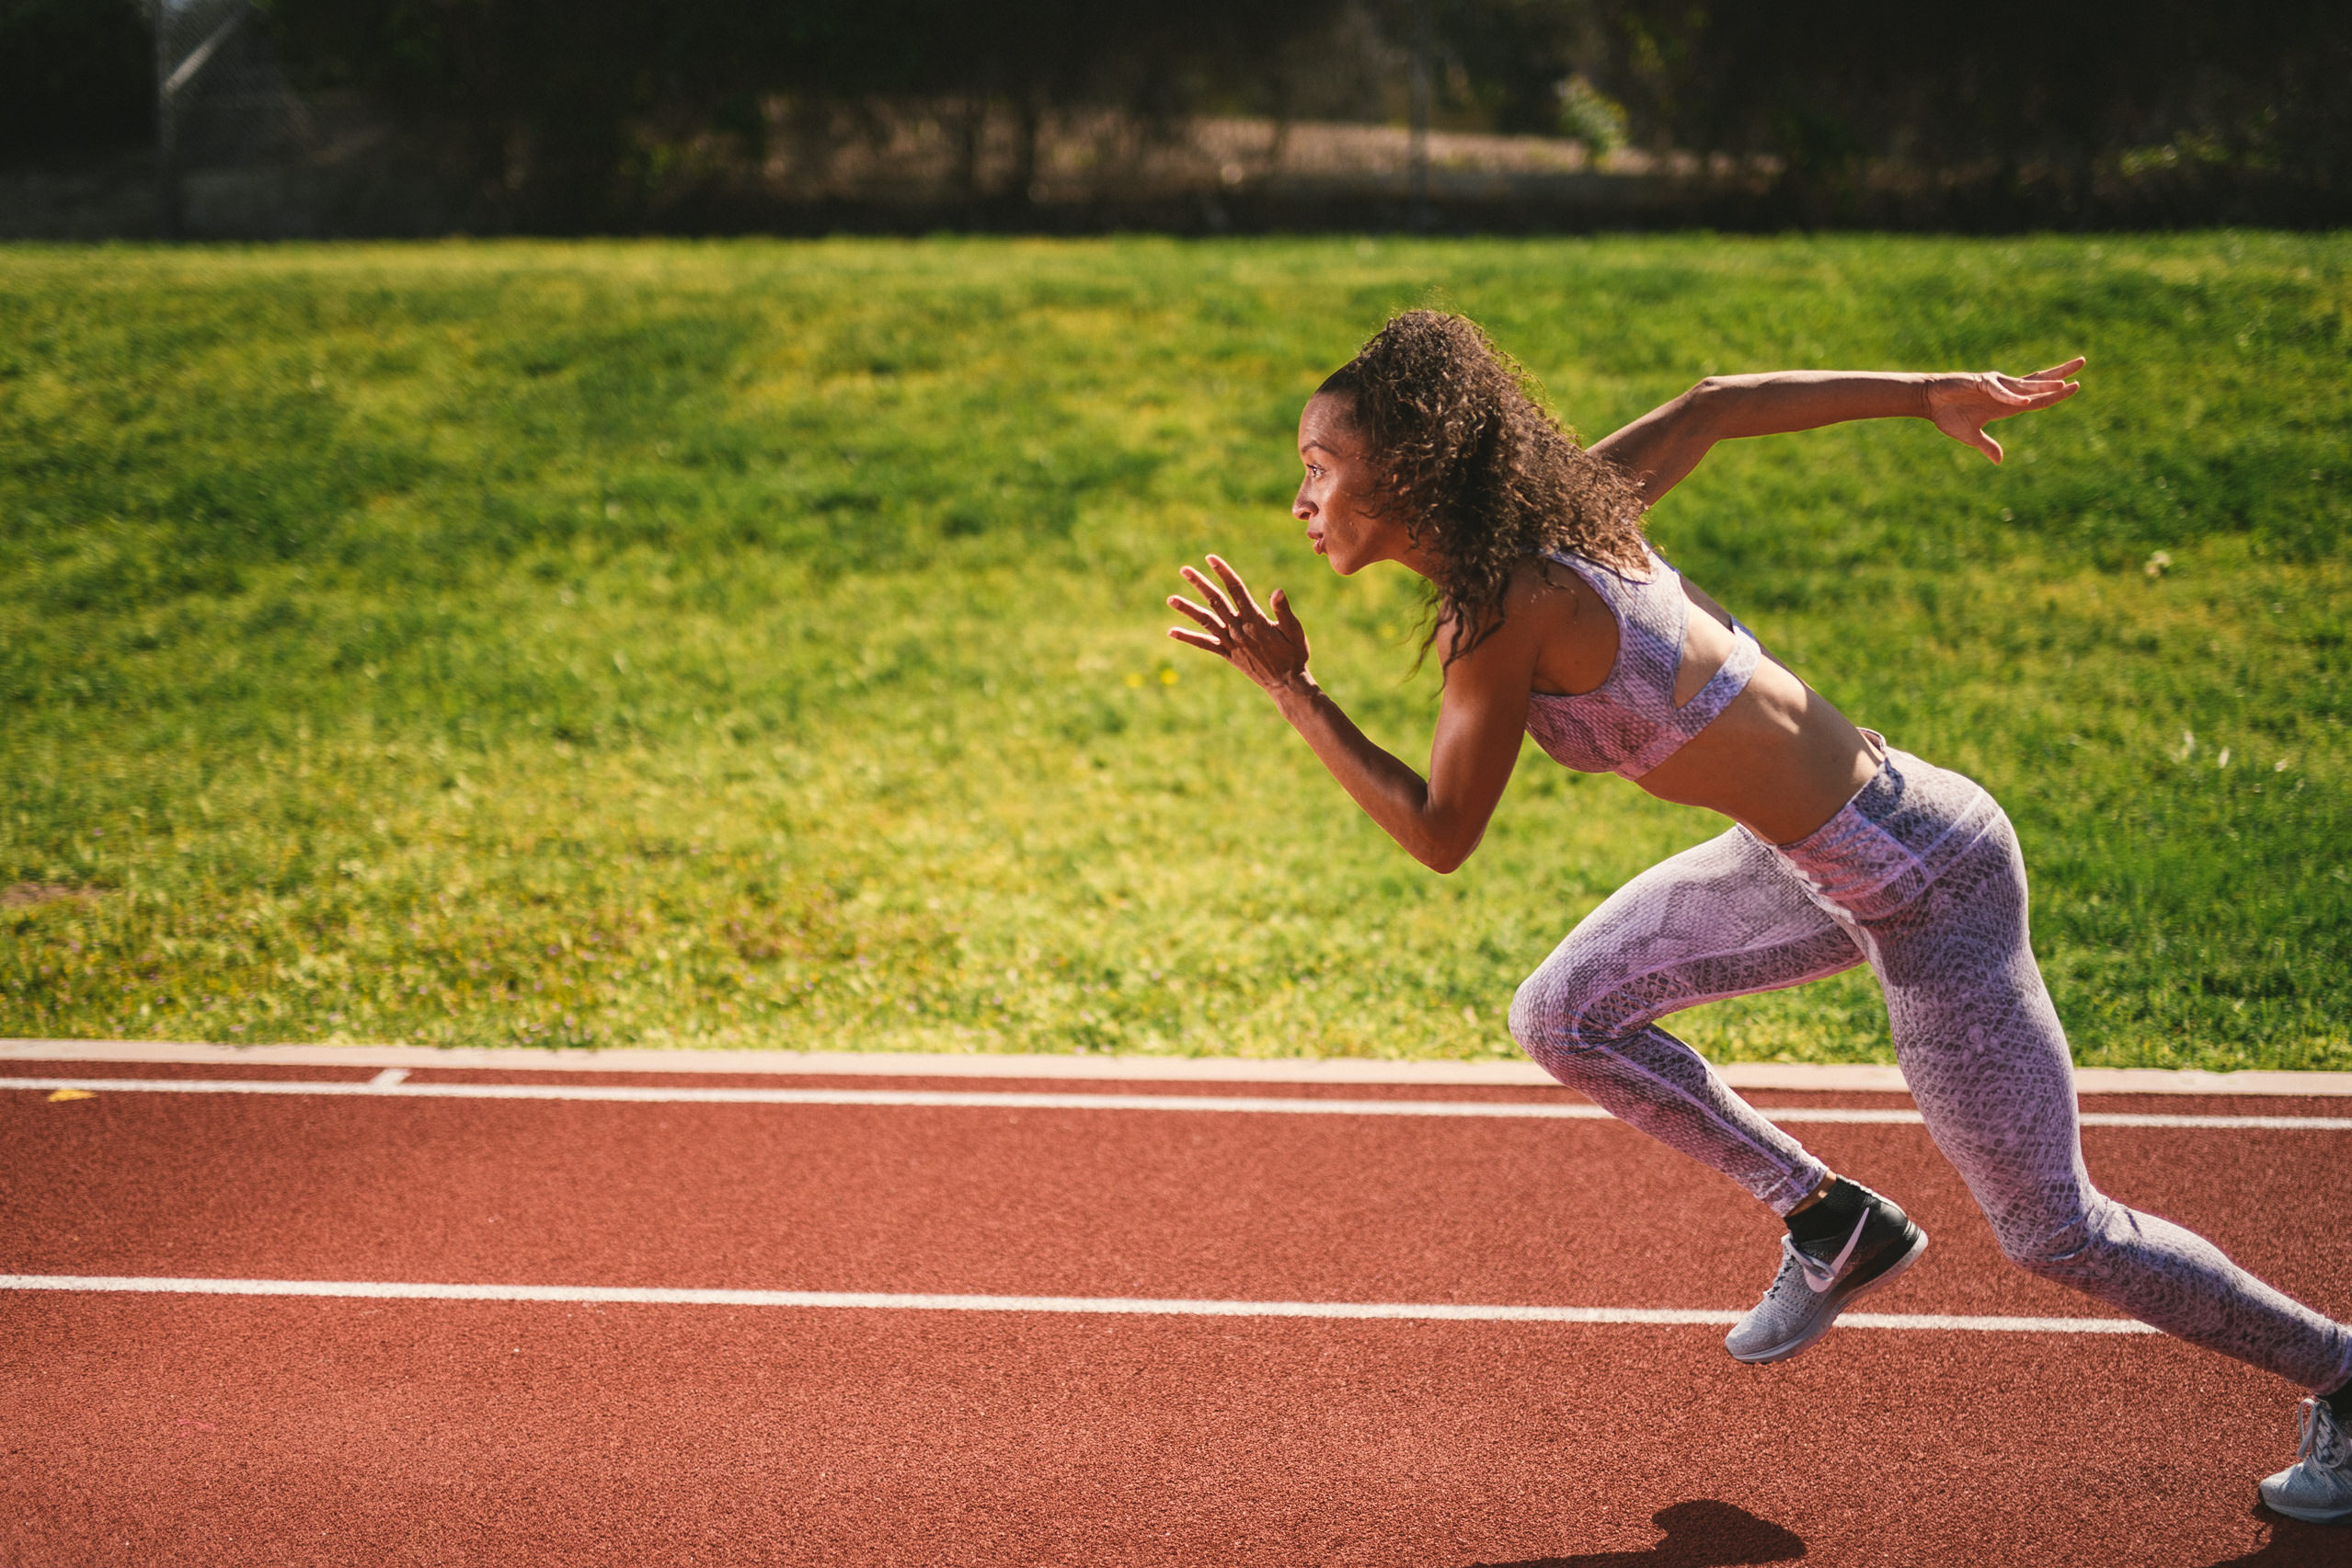 Professional Photography Services to elevate your brand C&I Studios Creative Marketing Kinetix 365 Side view of woman posing for camera in running pose on a track field in track outfit